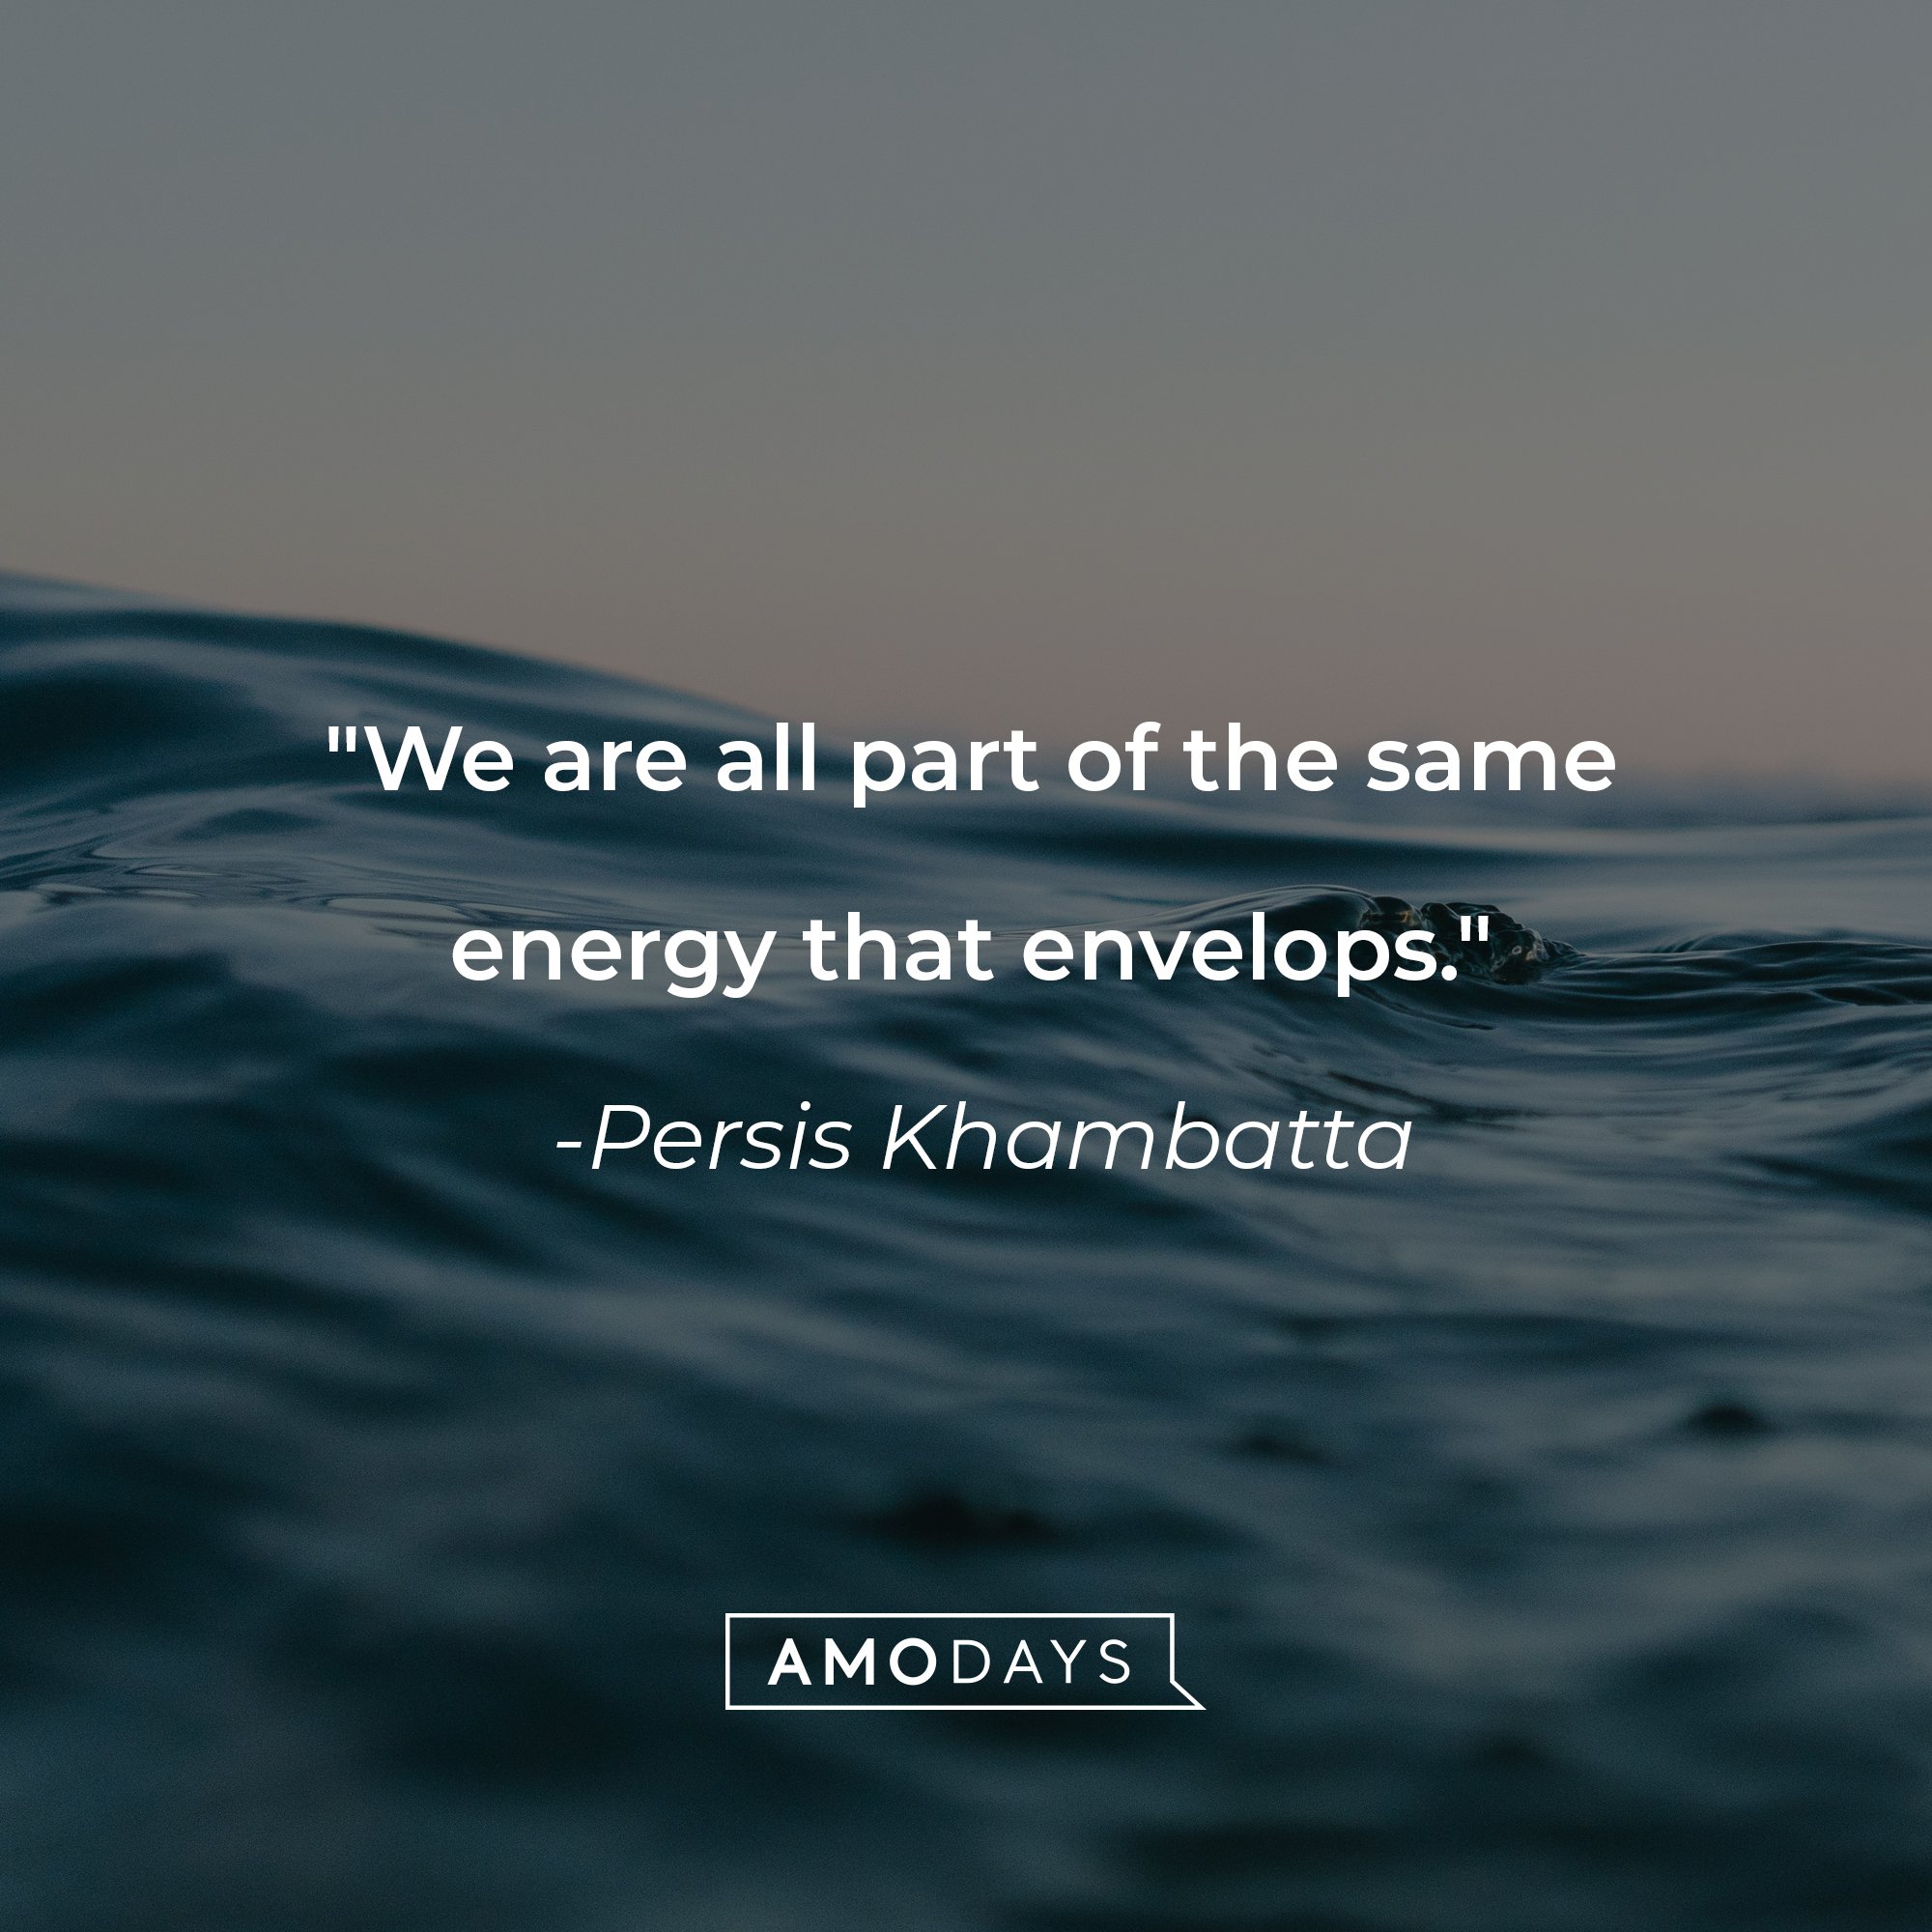 Persis Khambatta's quote: "We are all part of the same energy that envelops." | Image: AmoDays